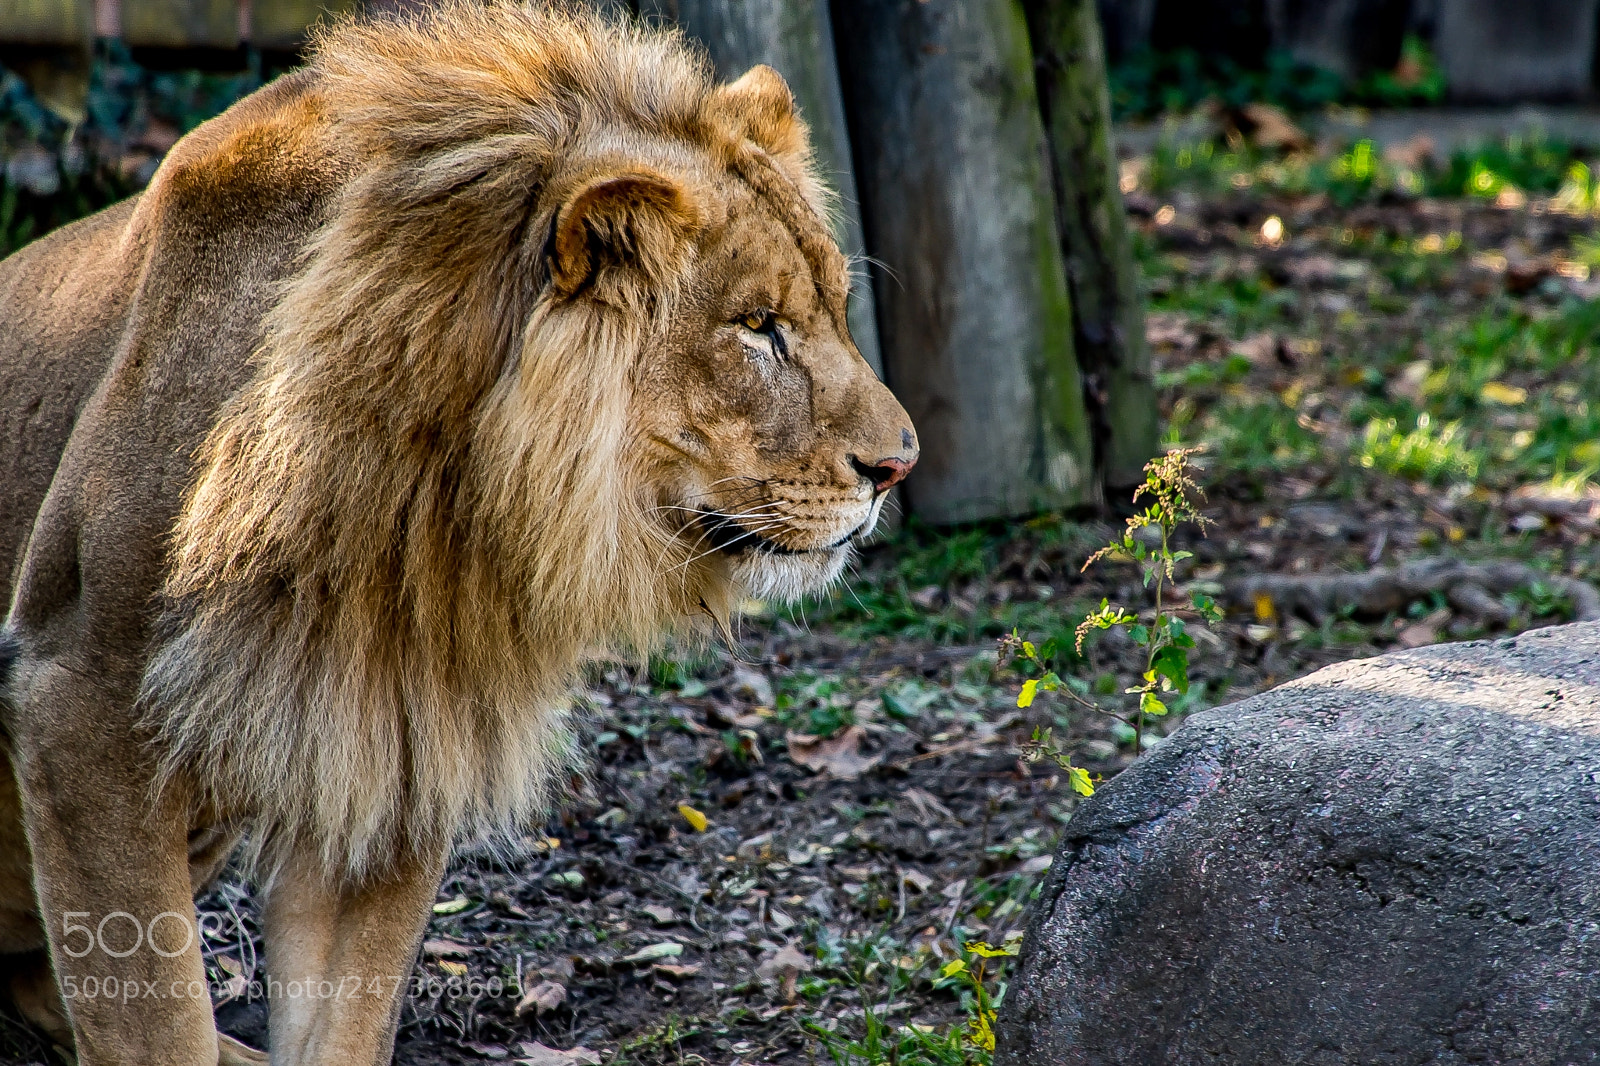 Sony a9 sample photo. The lion observes photography